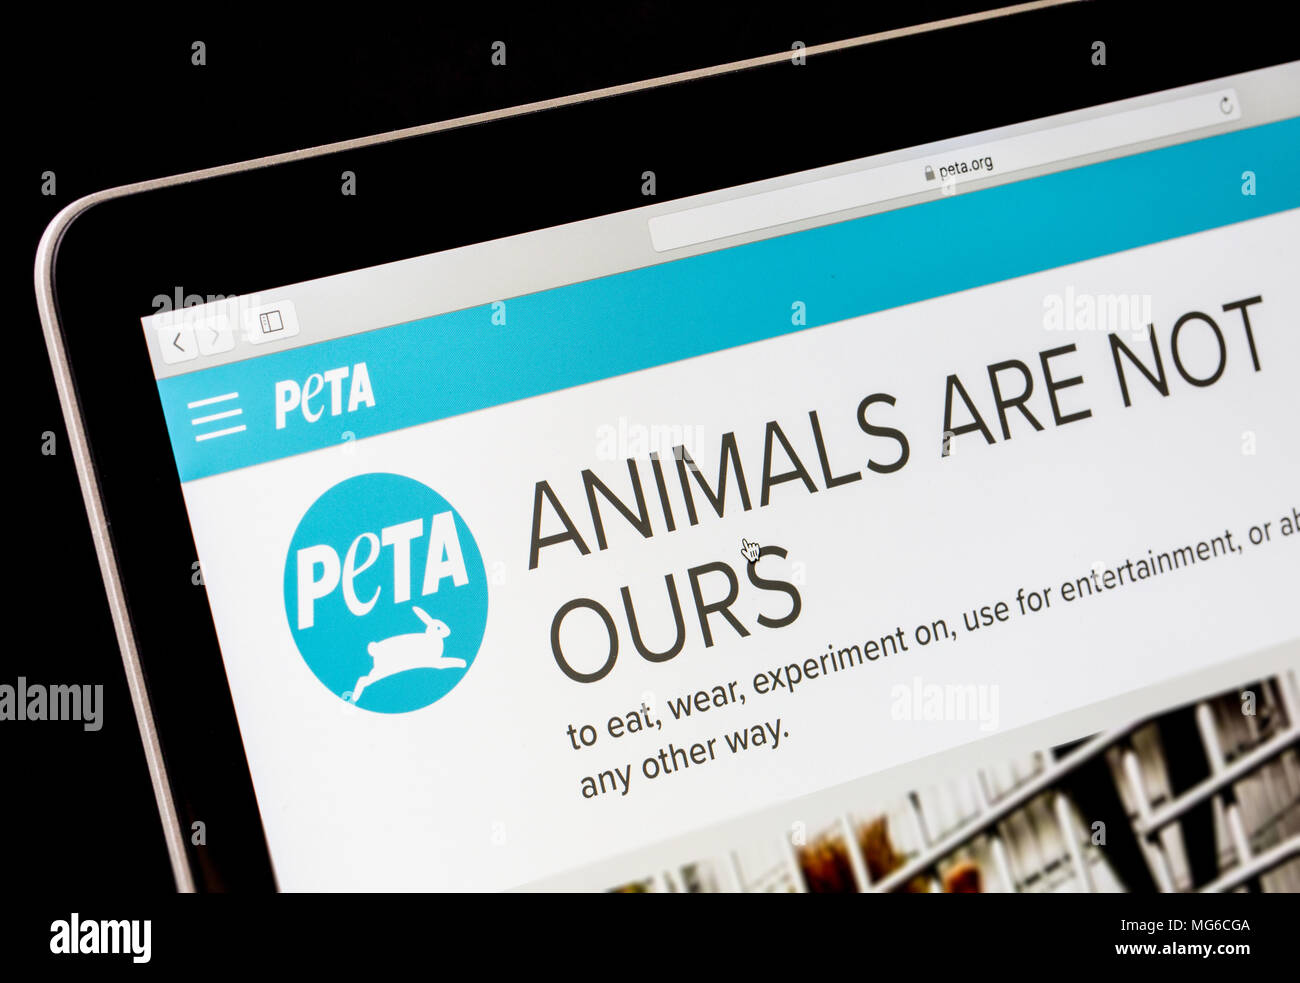 PETA ( People for the Ethical Treatment of Animals ) website on a laptop computer Stock Photo